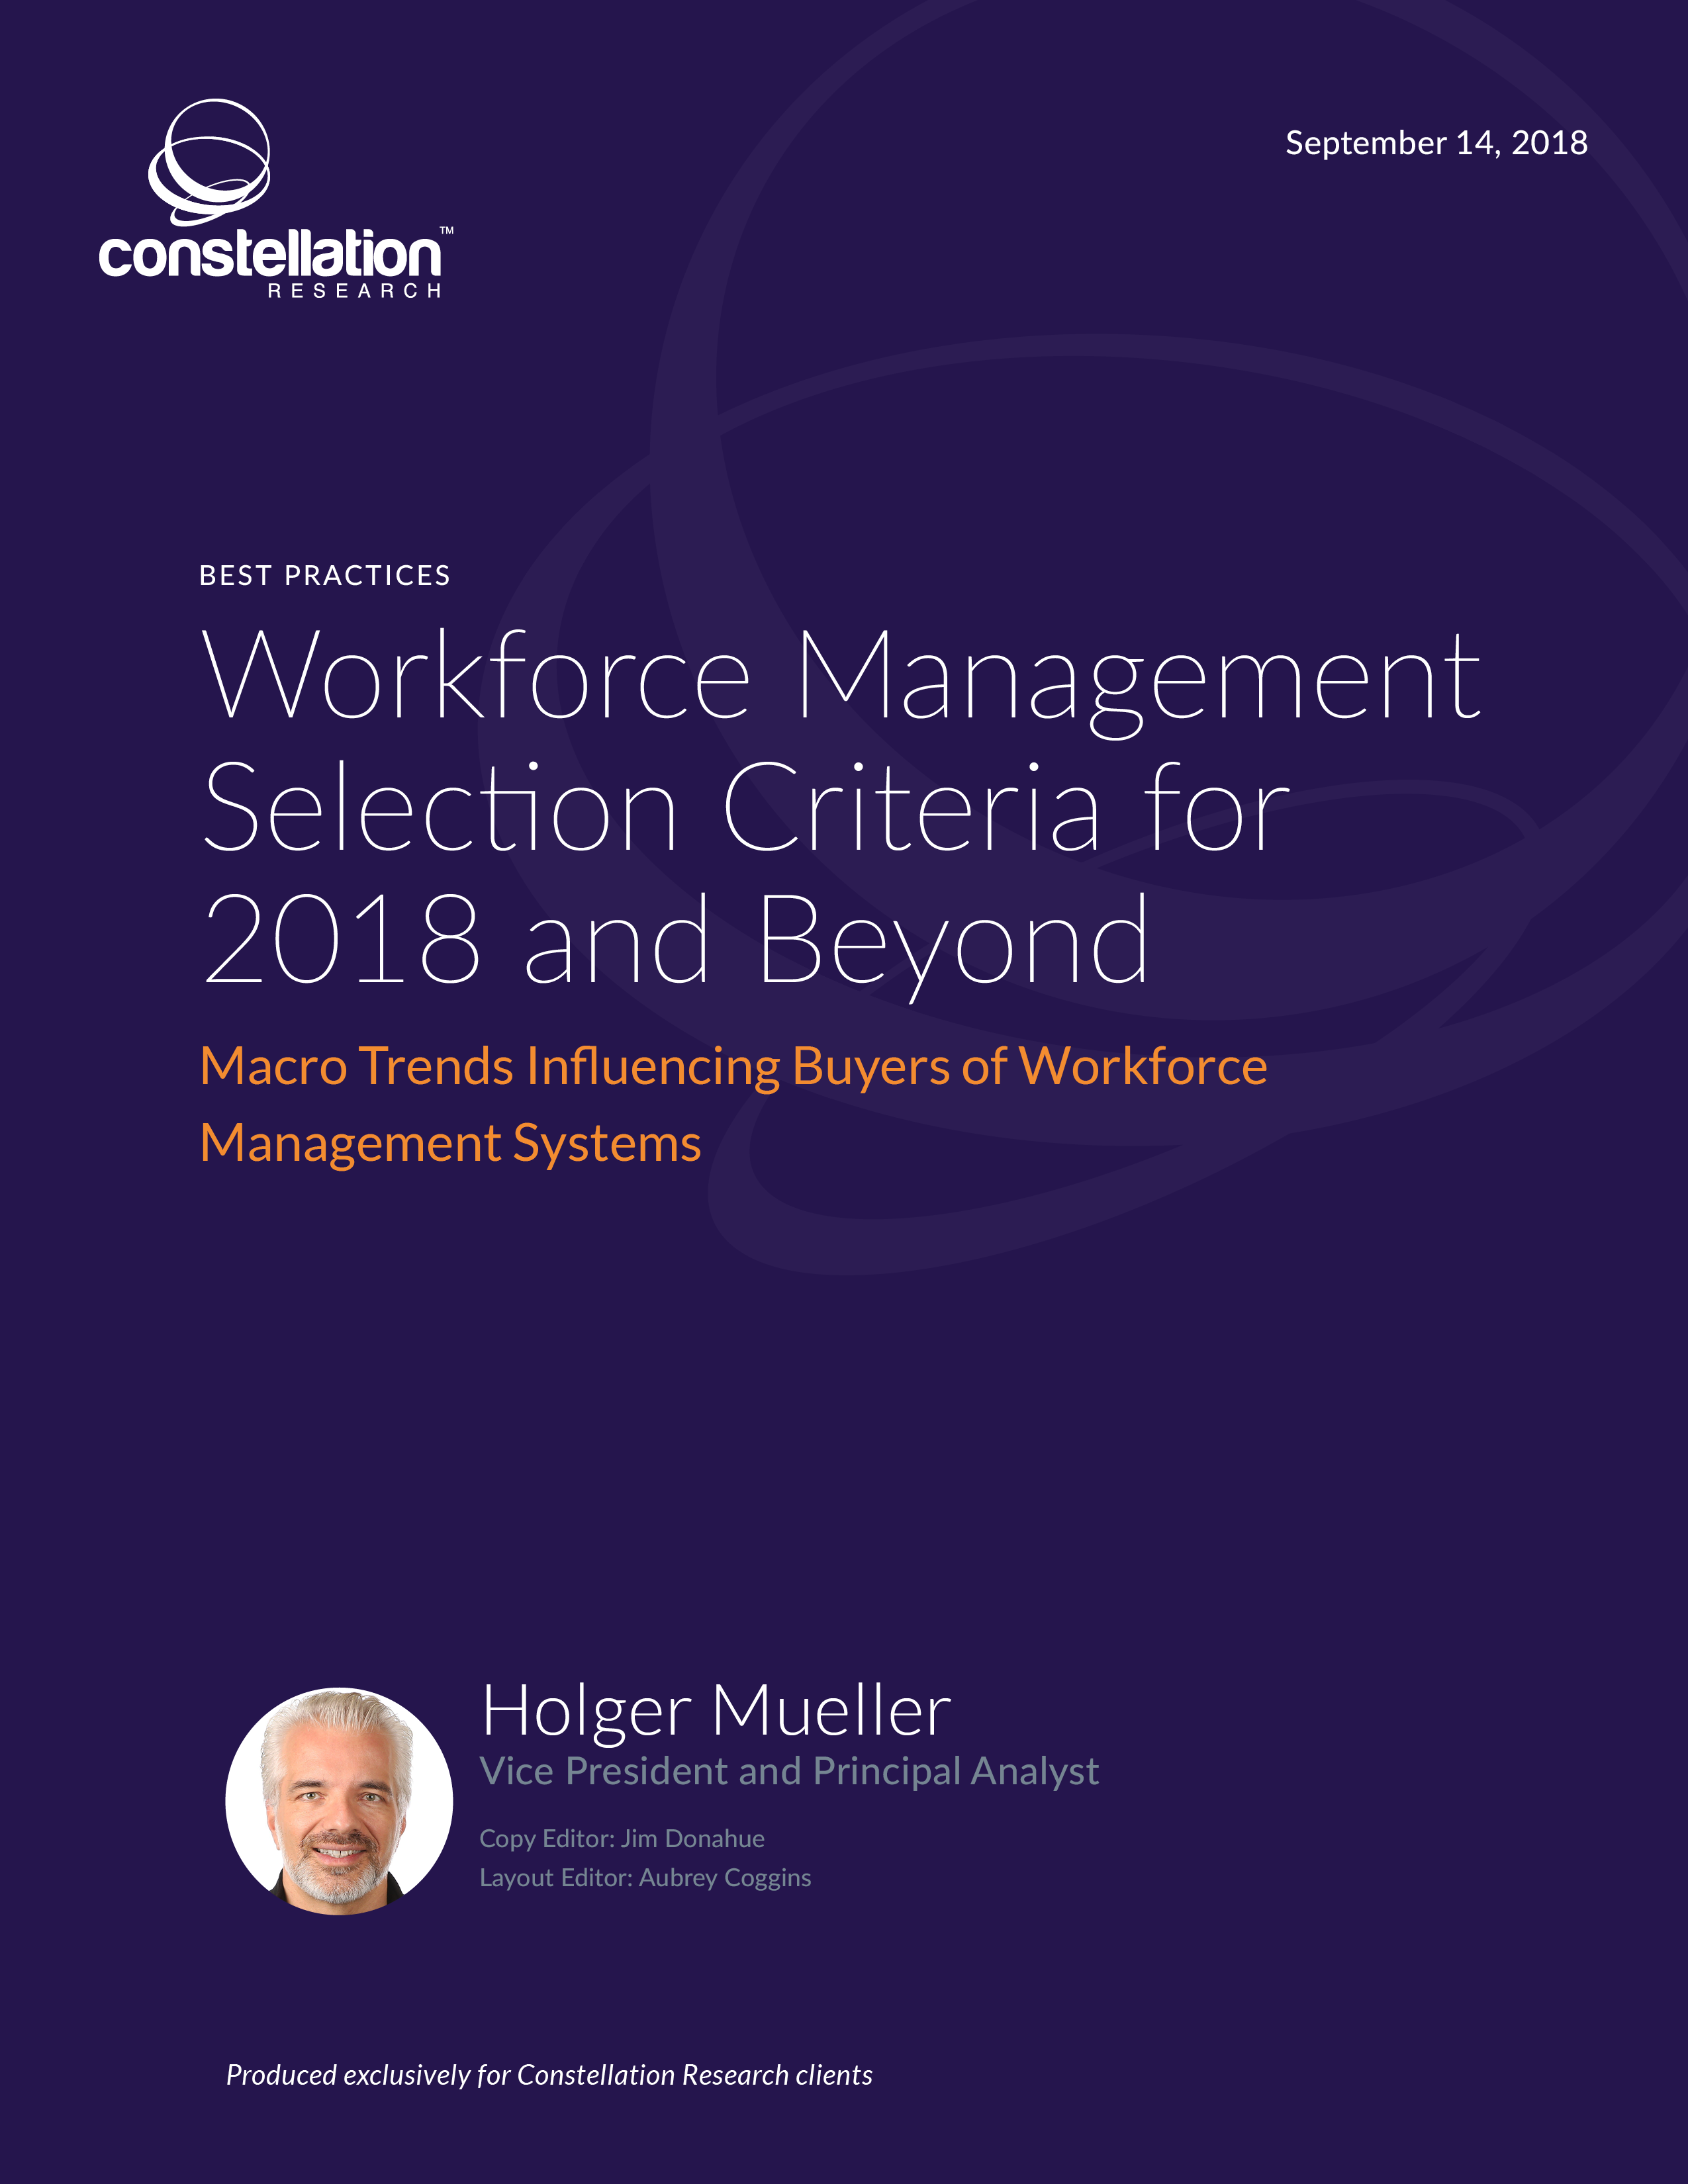 Workforce management selection criteria for 2018 and beyond